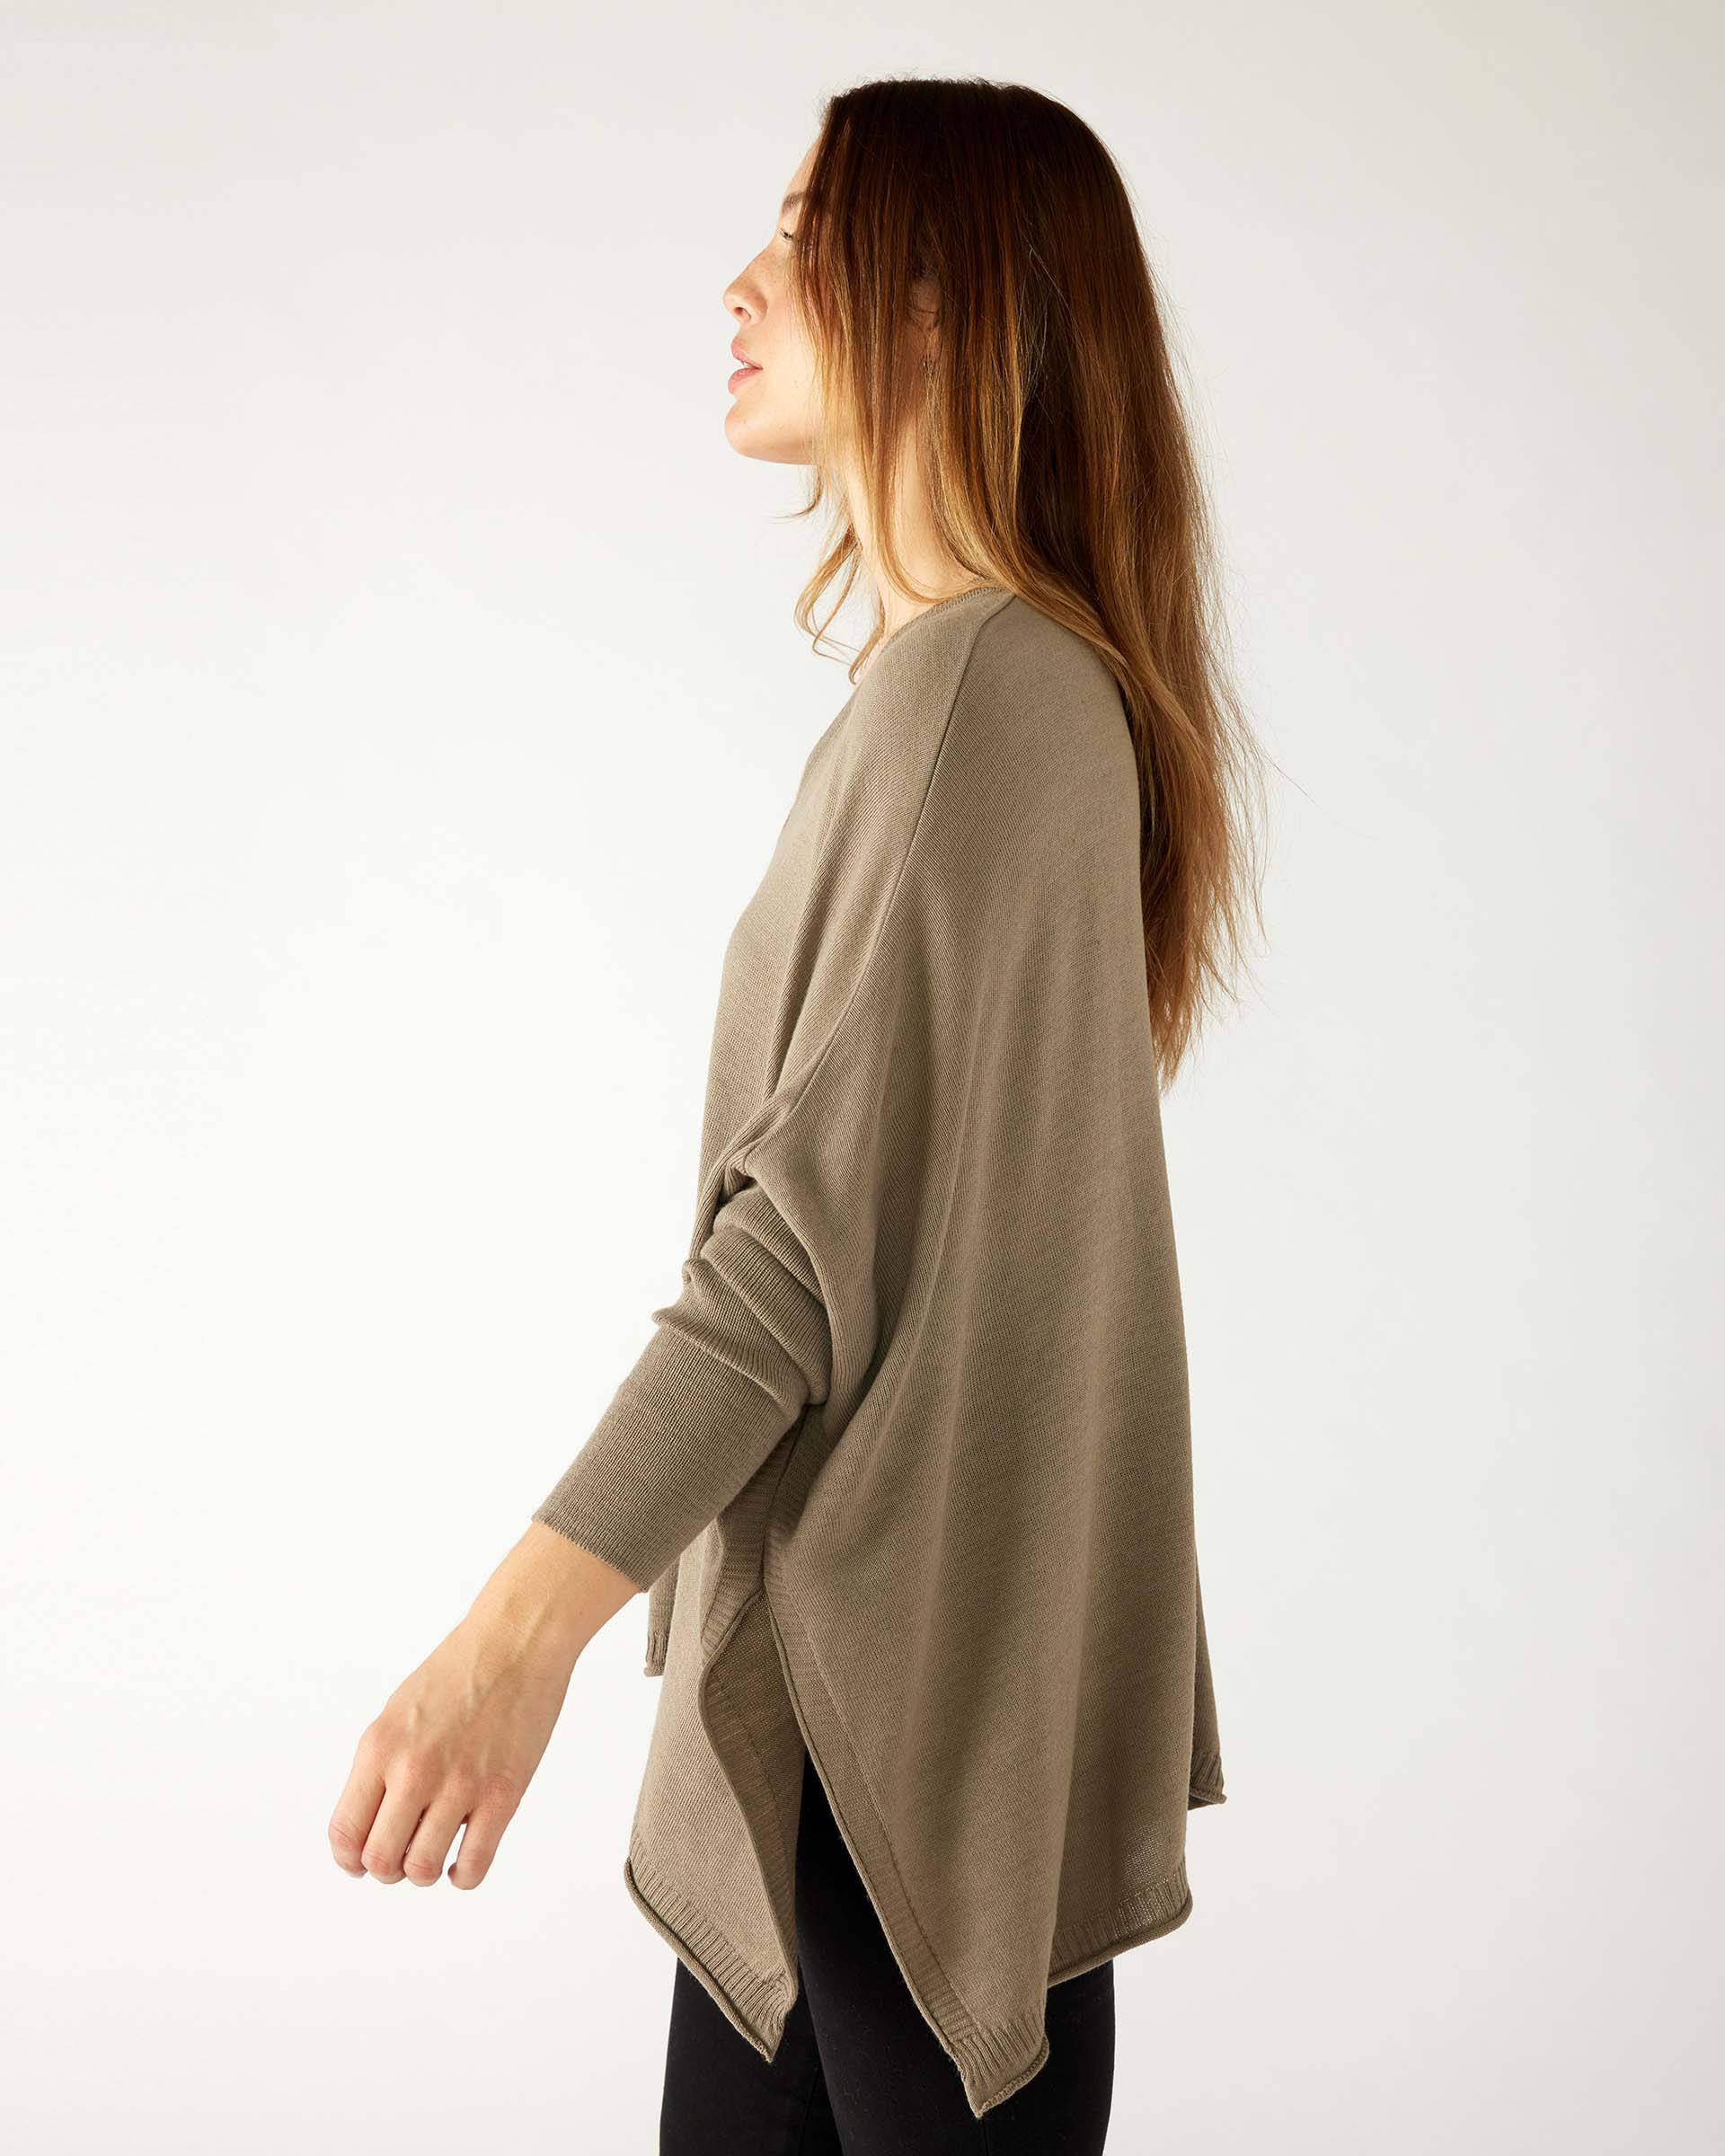 profile of woman wearing mersea catalina v-neck sweater in hazelnut color